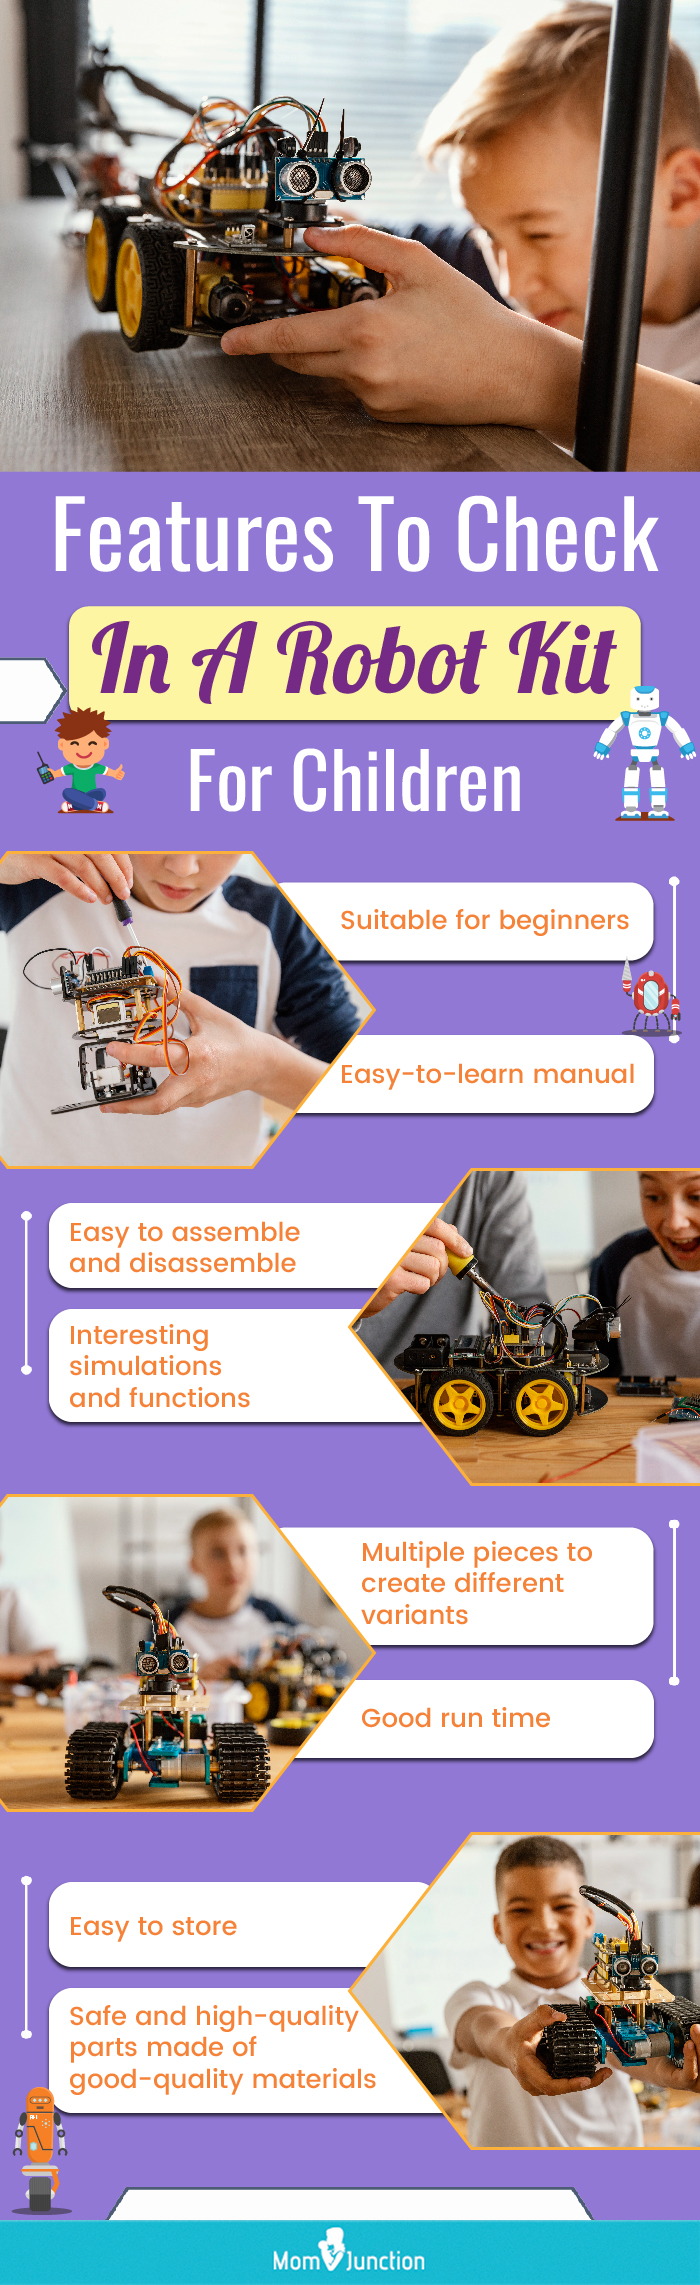 Features To Check In A Robot Kit For Children (infographic)